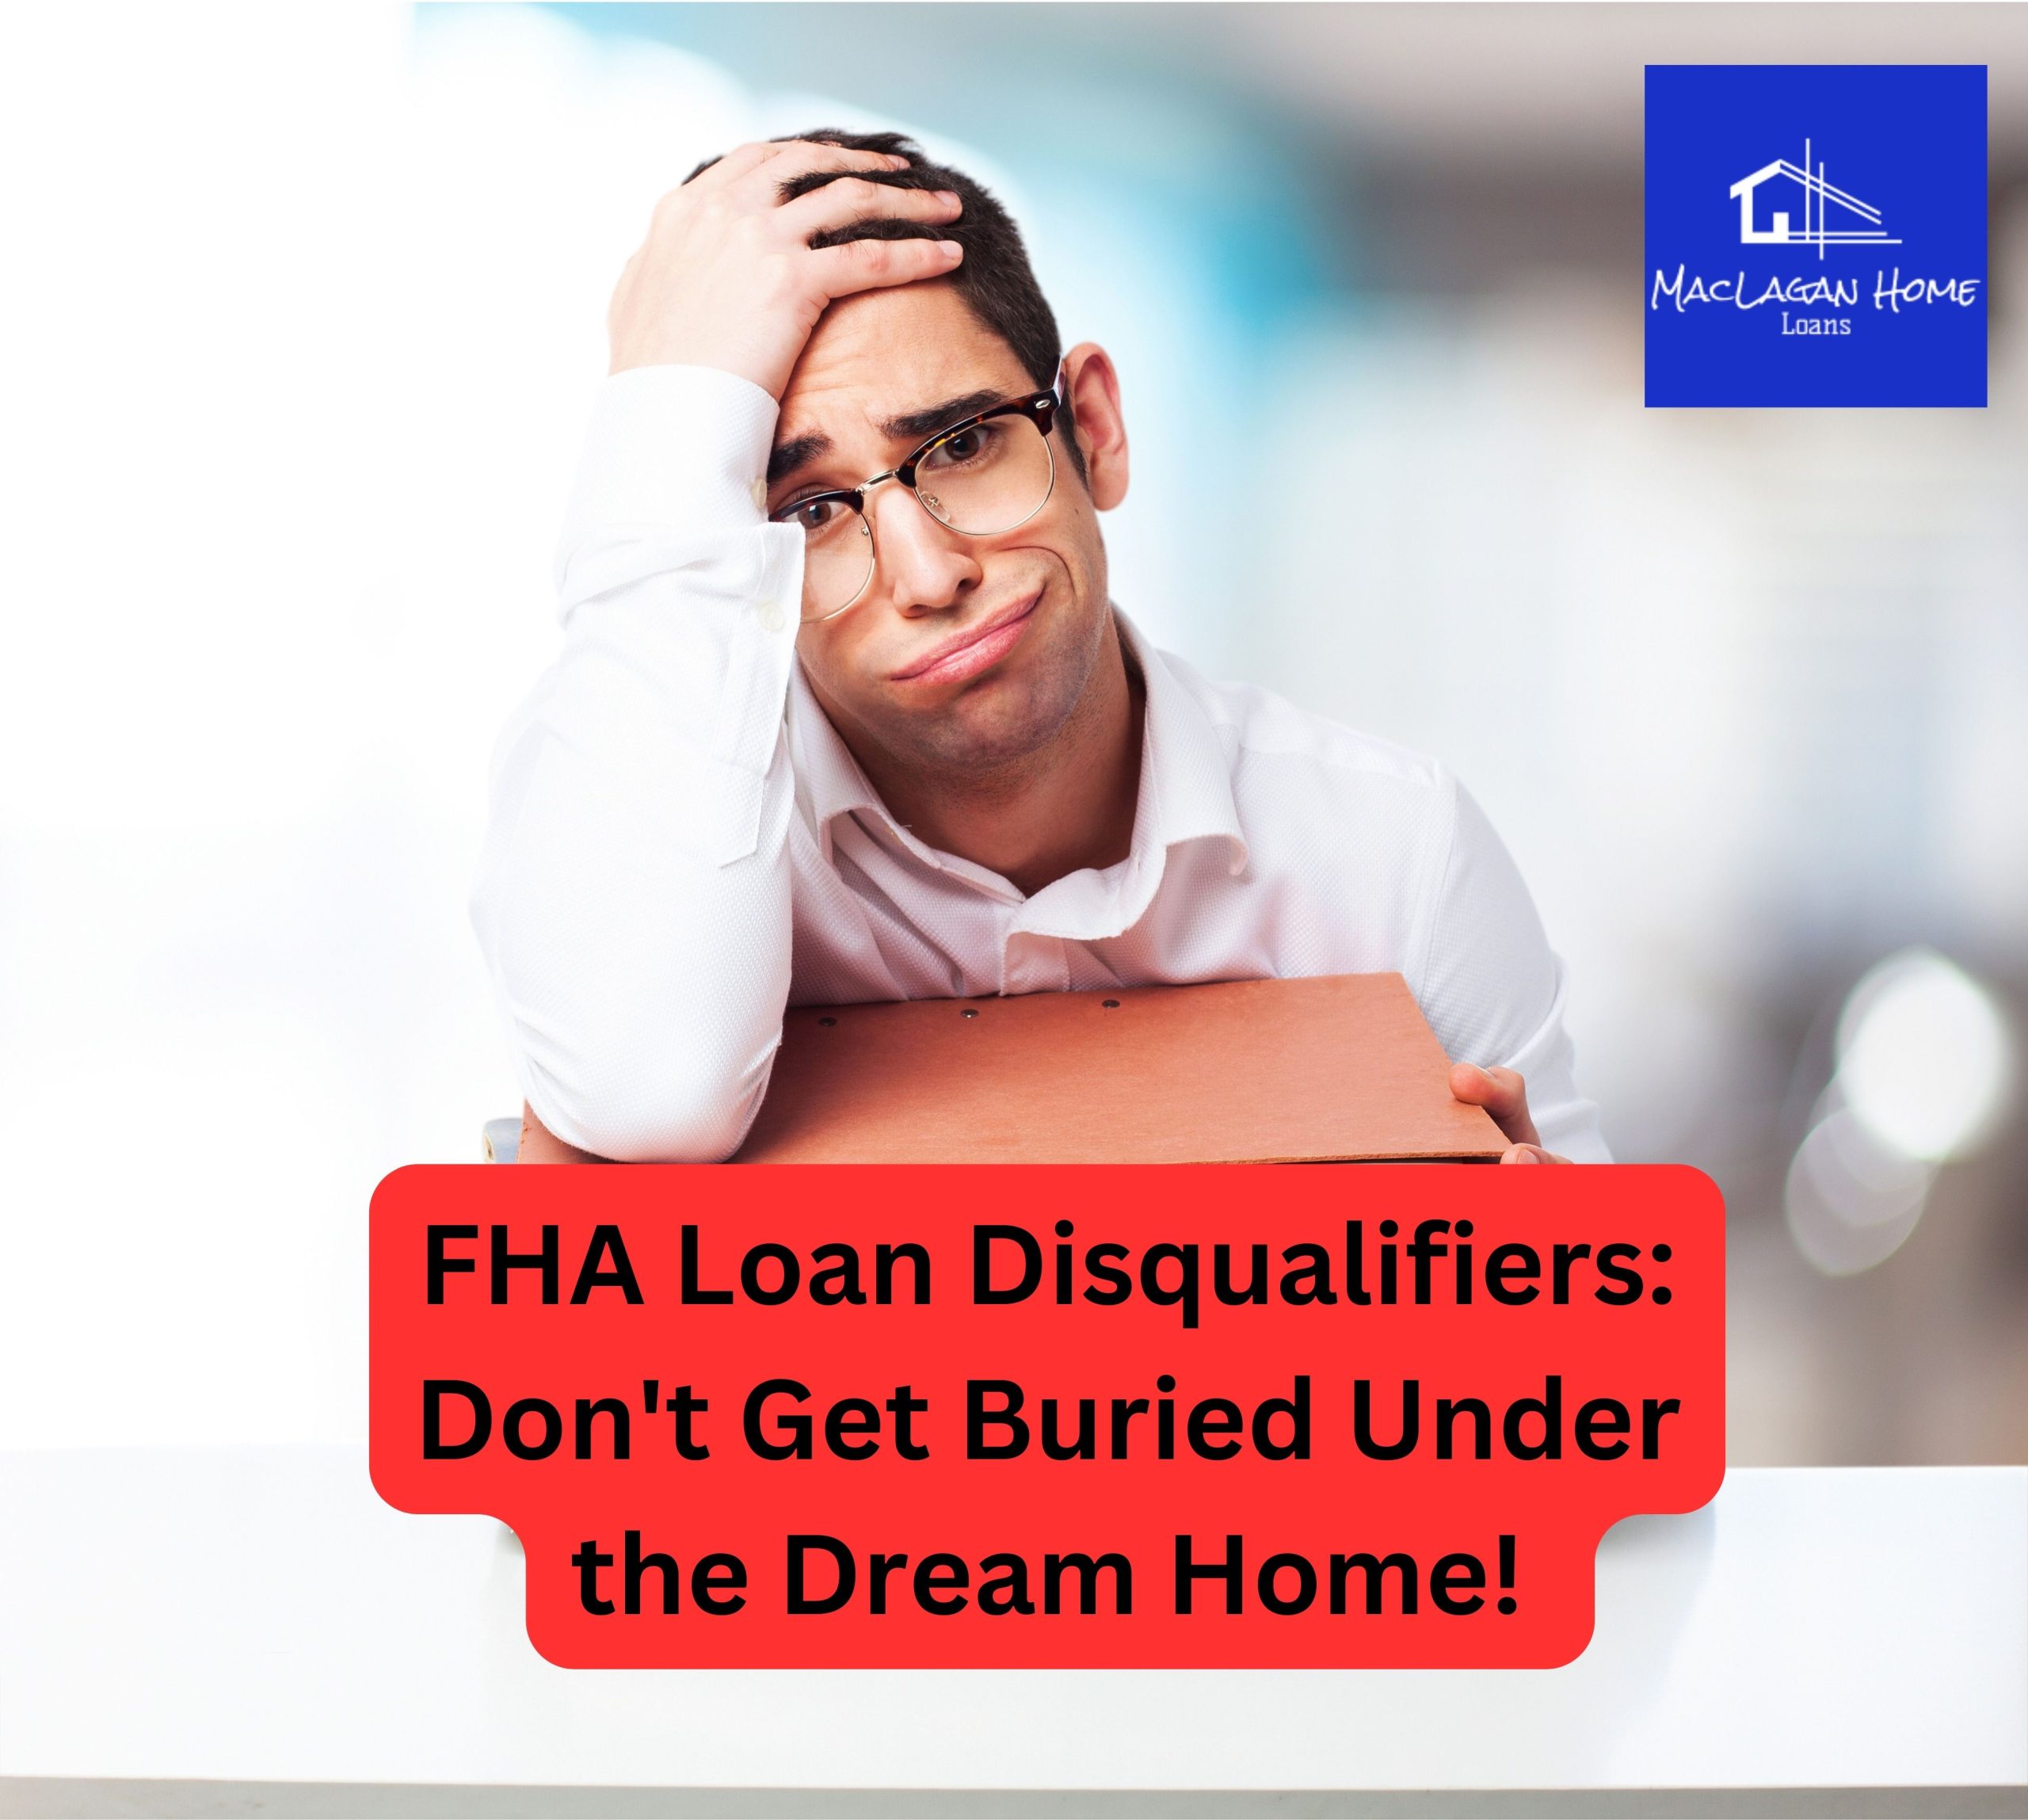 FHA Loan Disqualifiers: Don’t Get Buried Under the Dream Home!